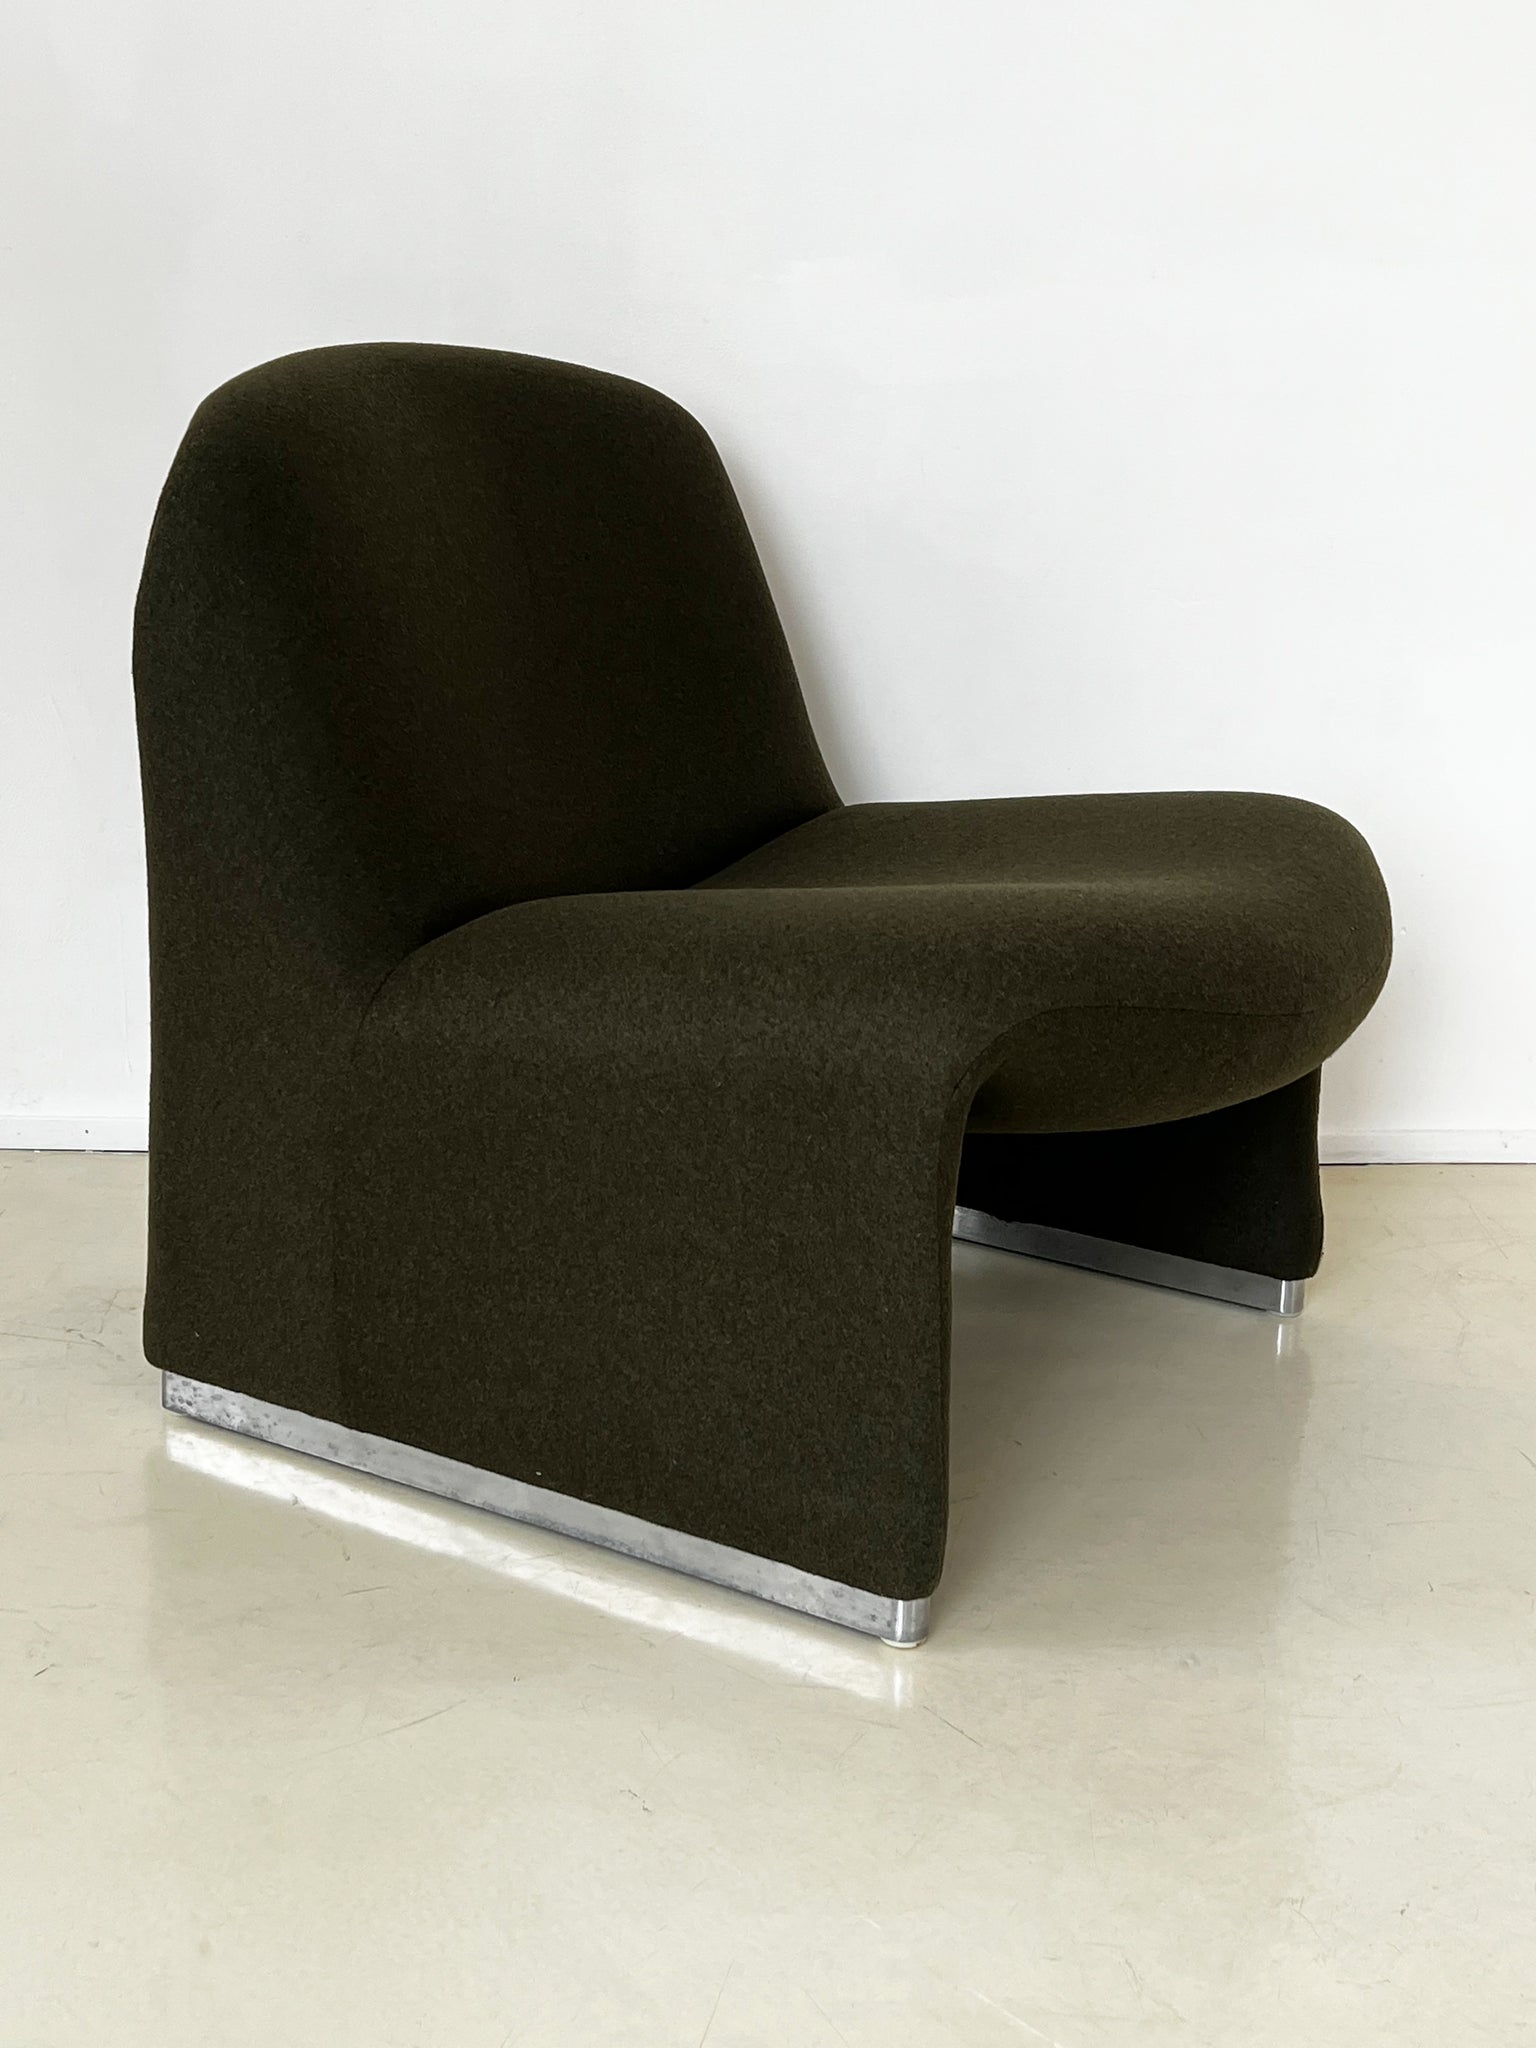 Vintage Forest Green Wool Alky Chair by Giancarlo Piretti, Italy